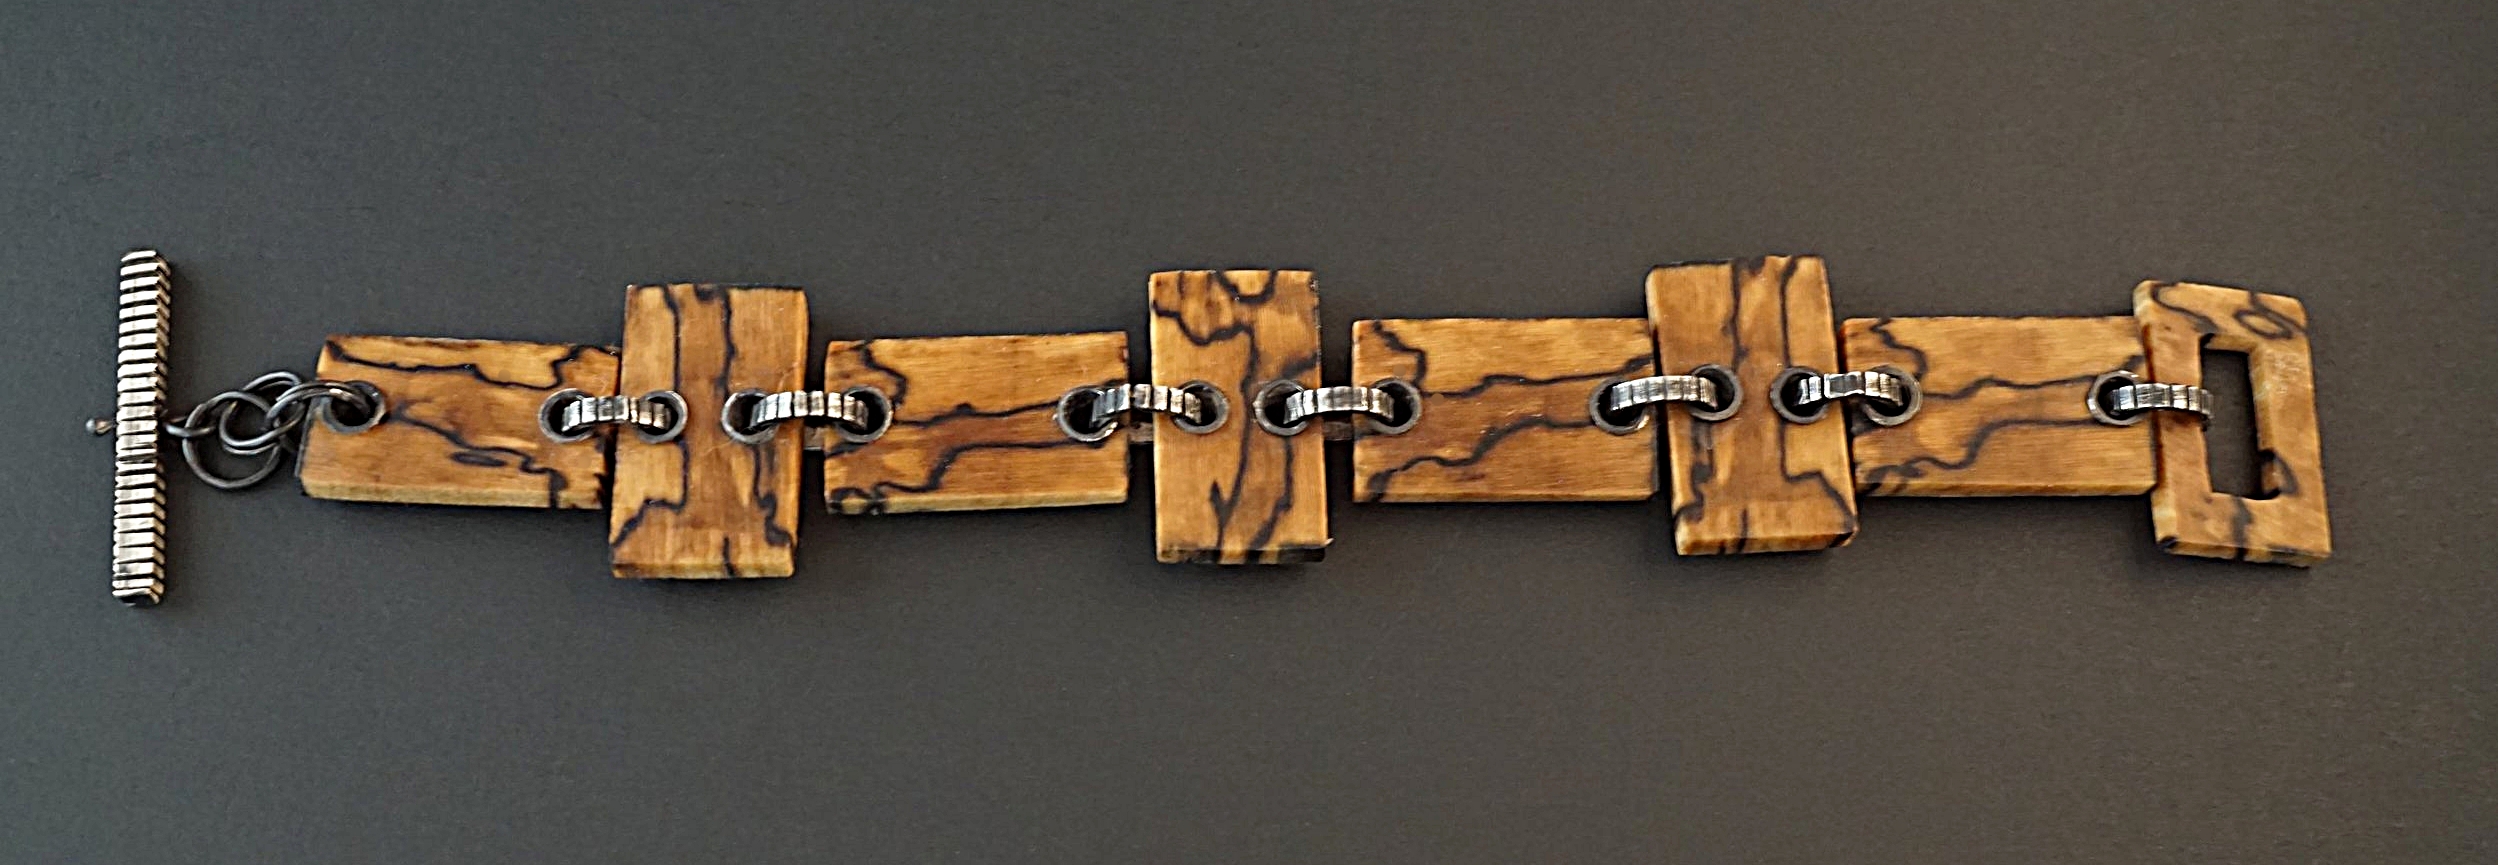 Hand carved spalted hackberry wood links with sterling silver textured connectors and toggle